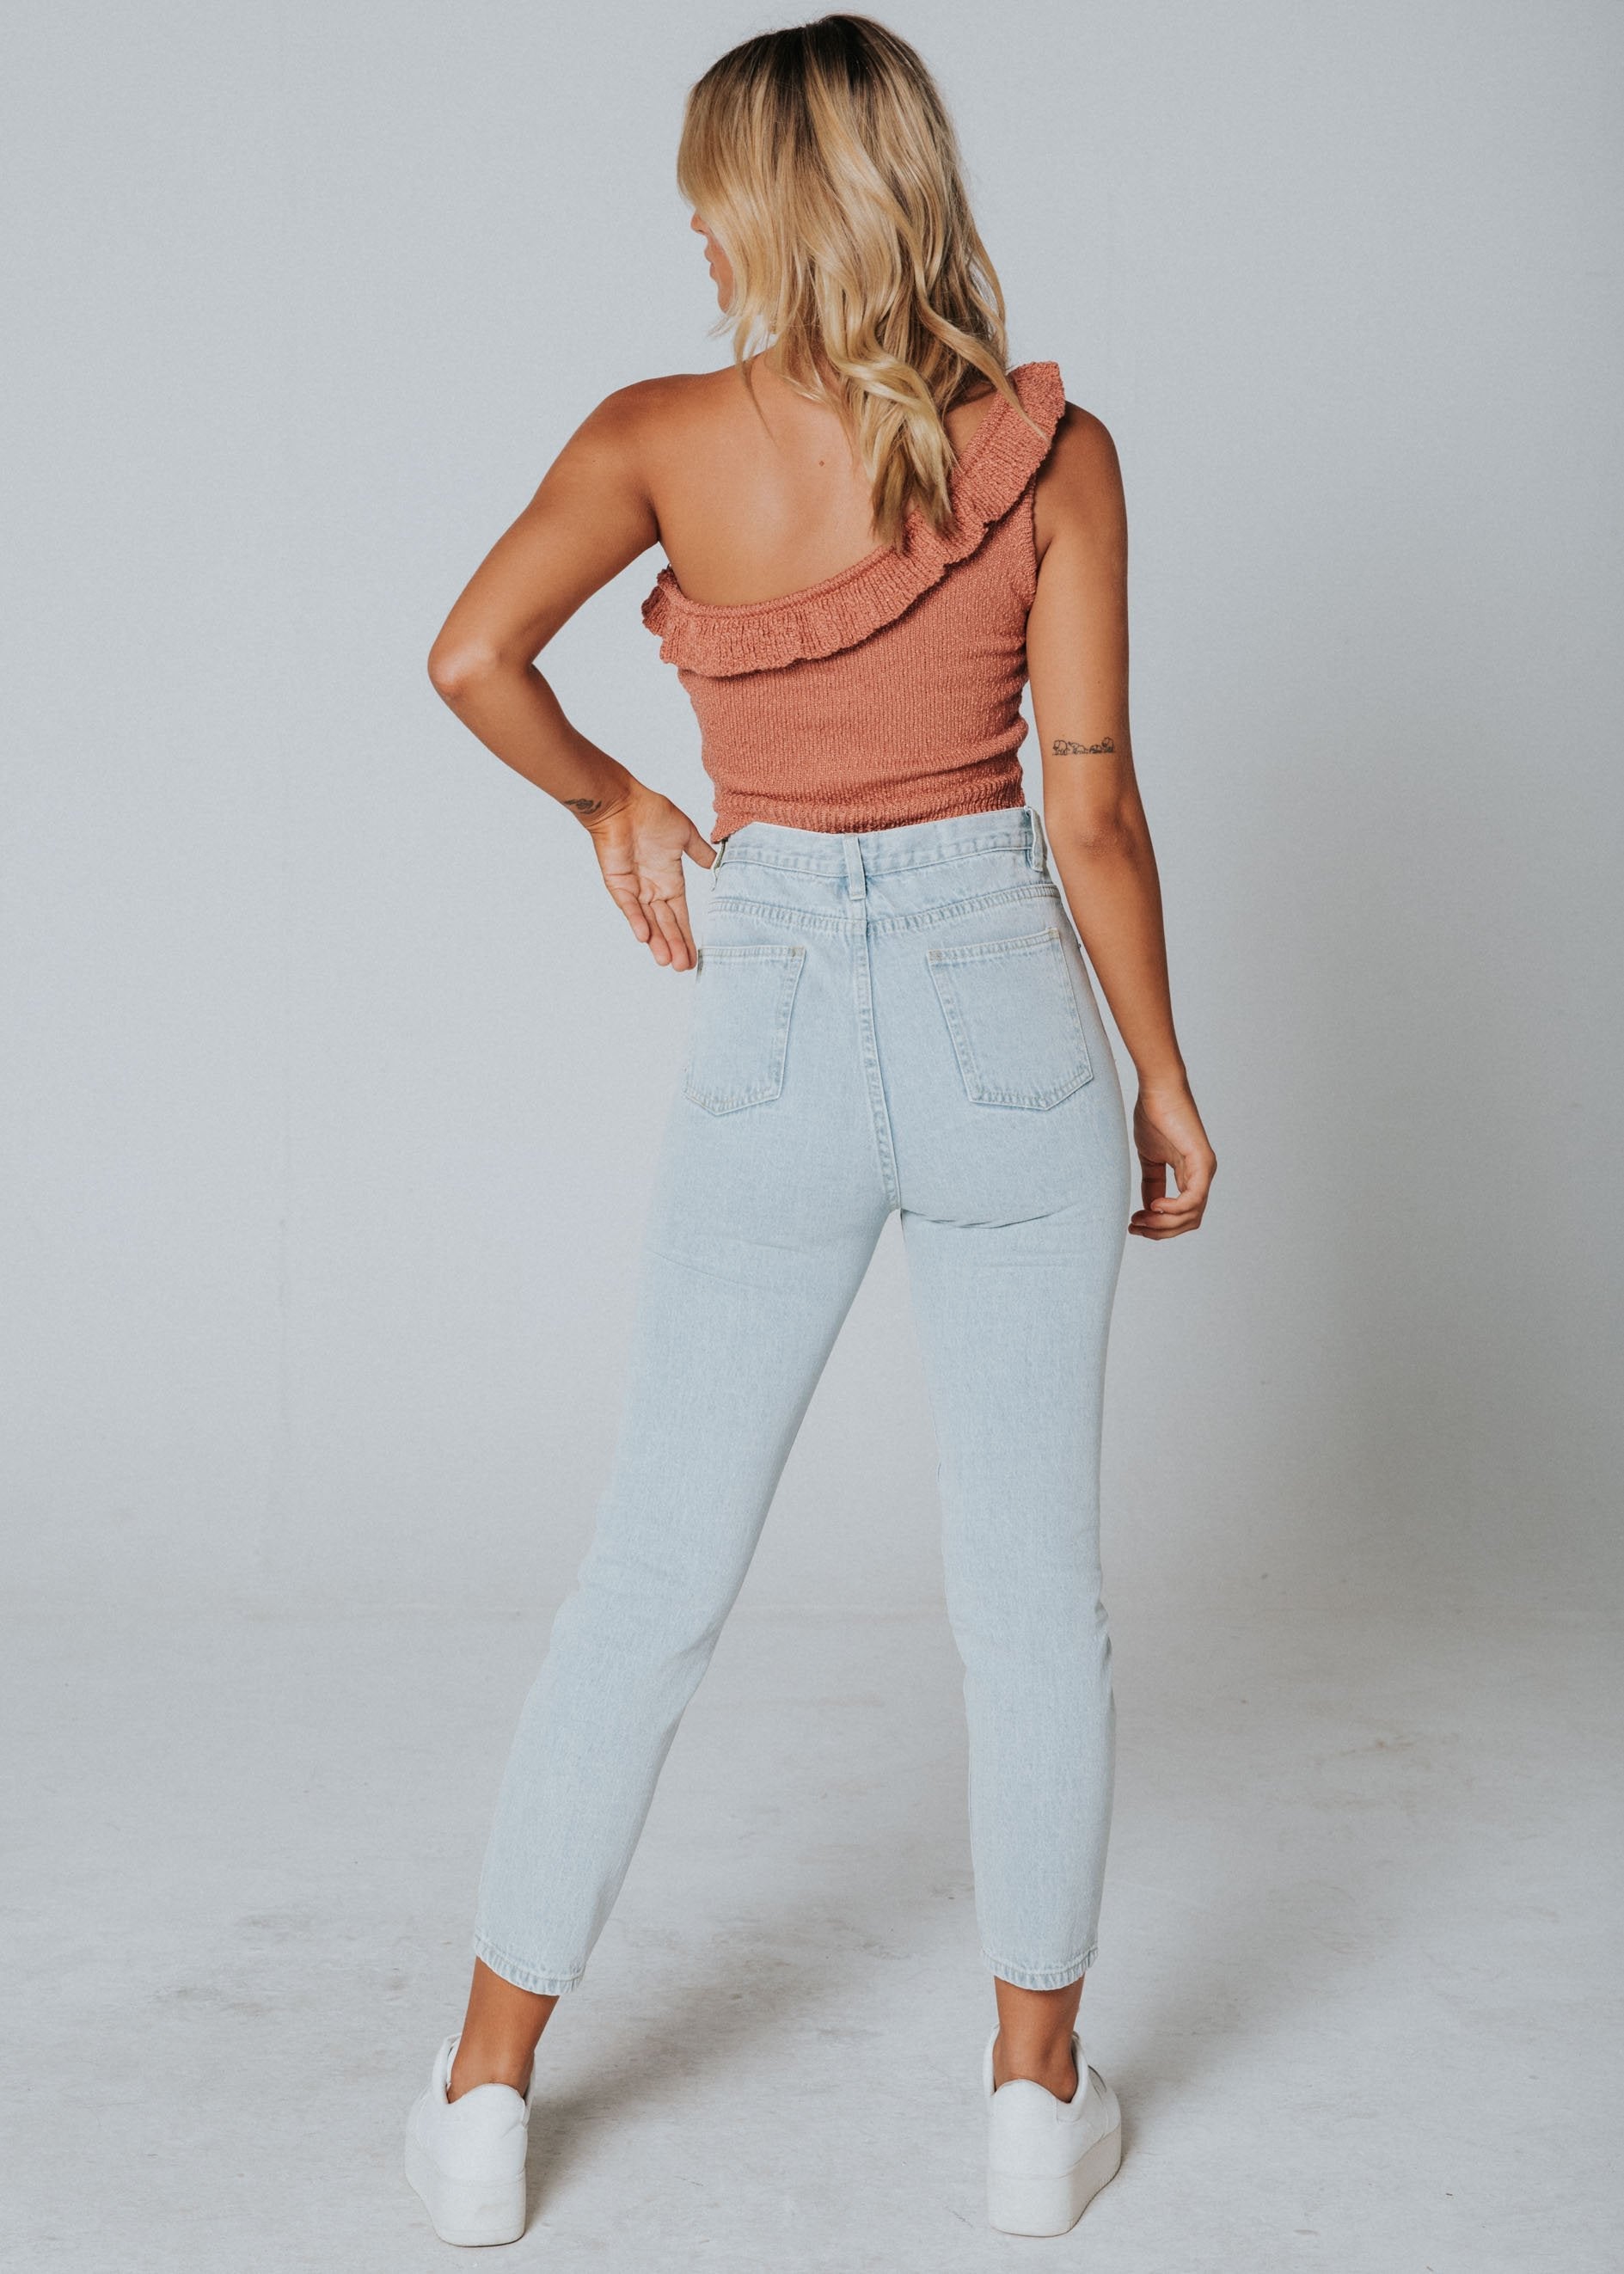 Nelly One Shoulder Crop - Rust